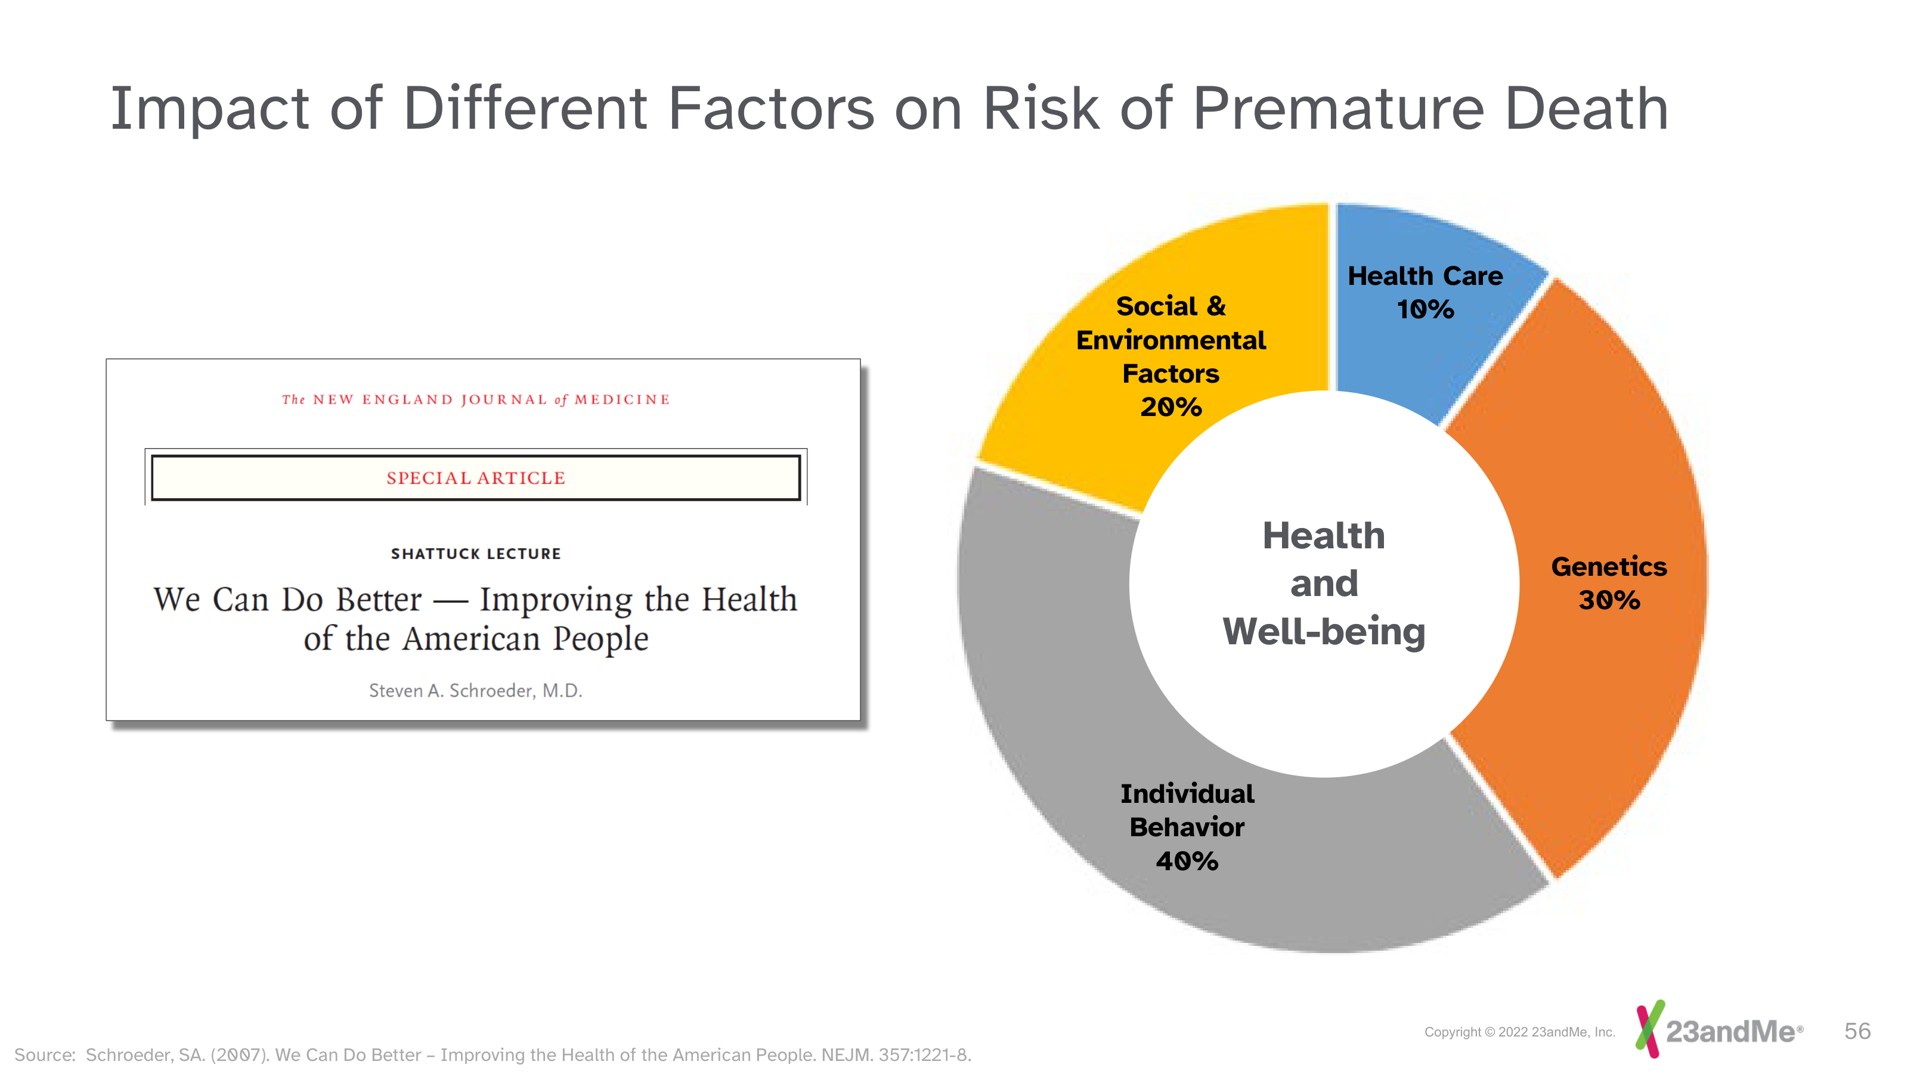 impact of different factors on risk of premature death | 23andMe